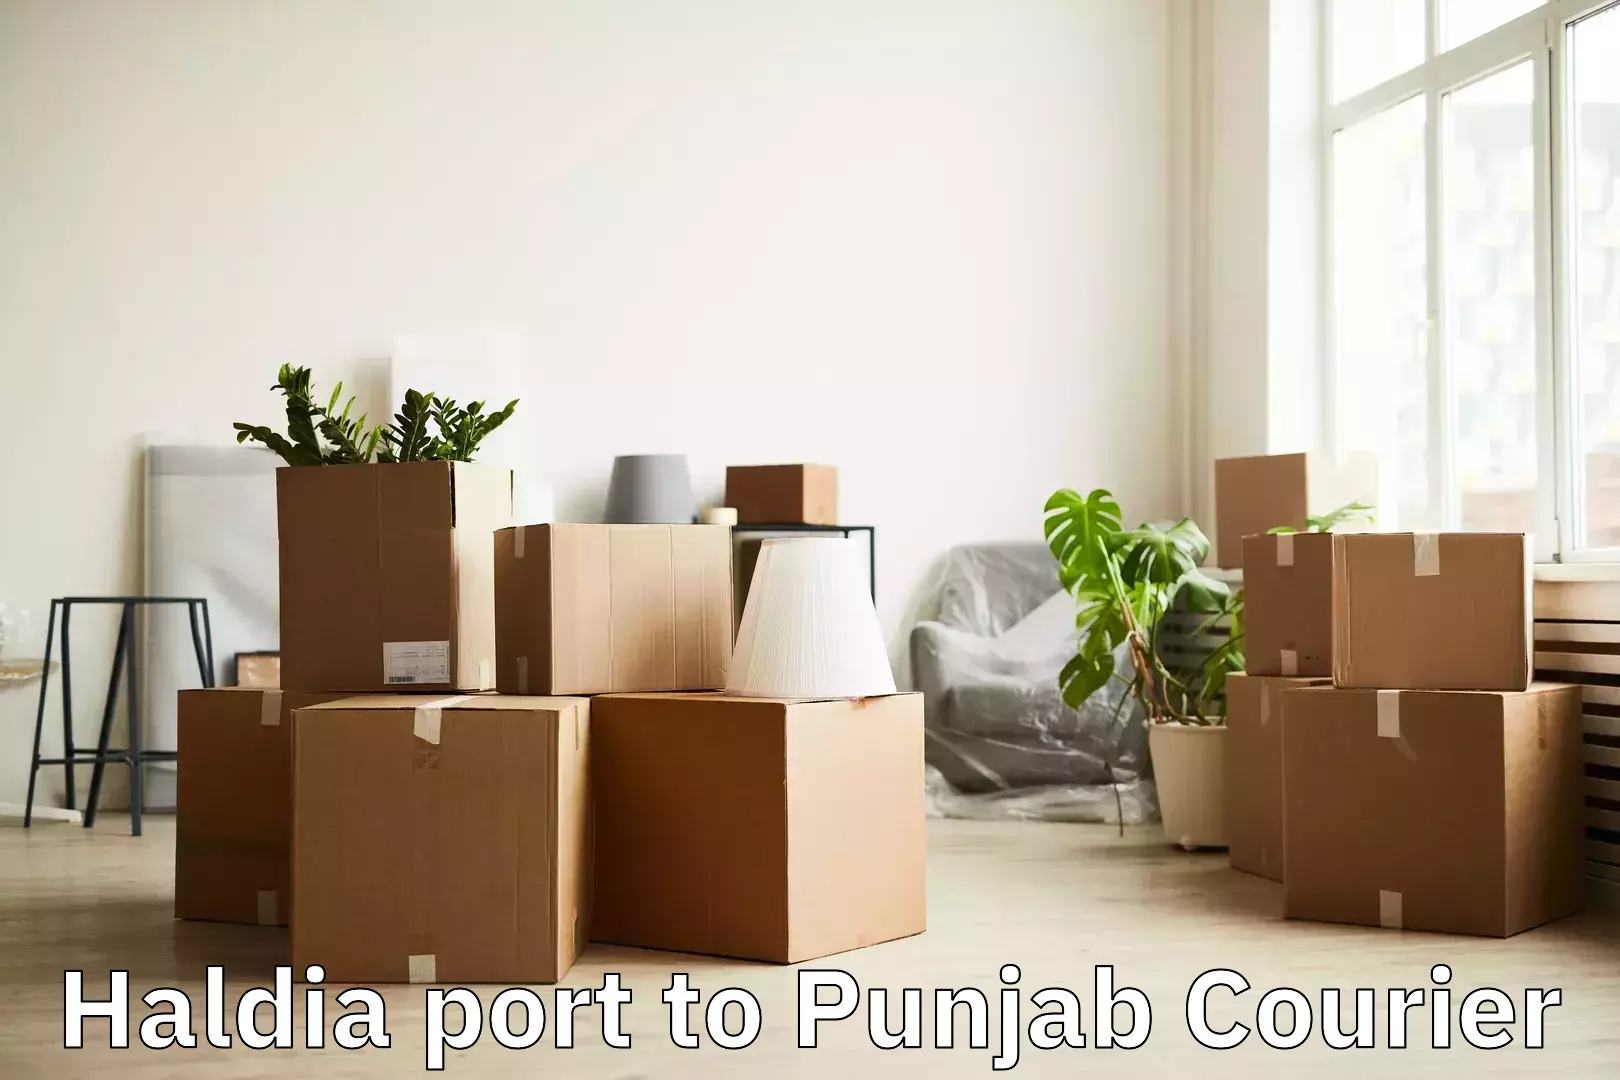 Baggage delivery technology Haldia port to Pathankot